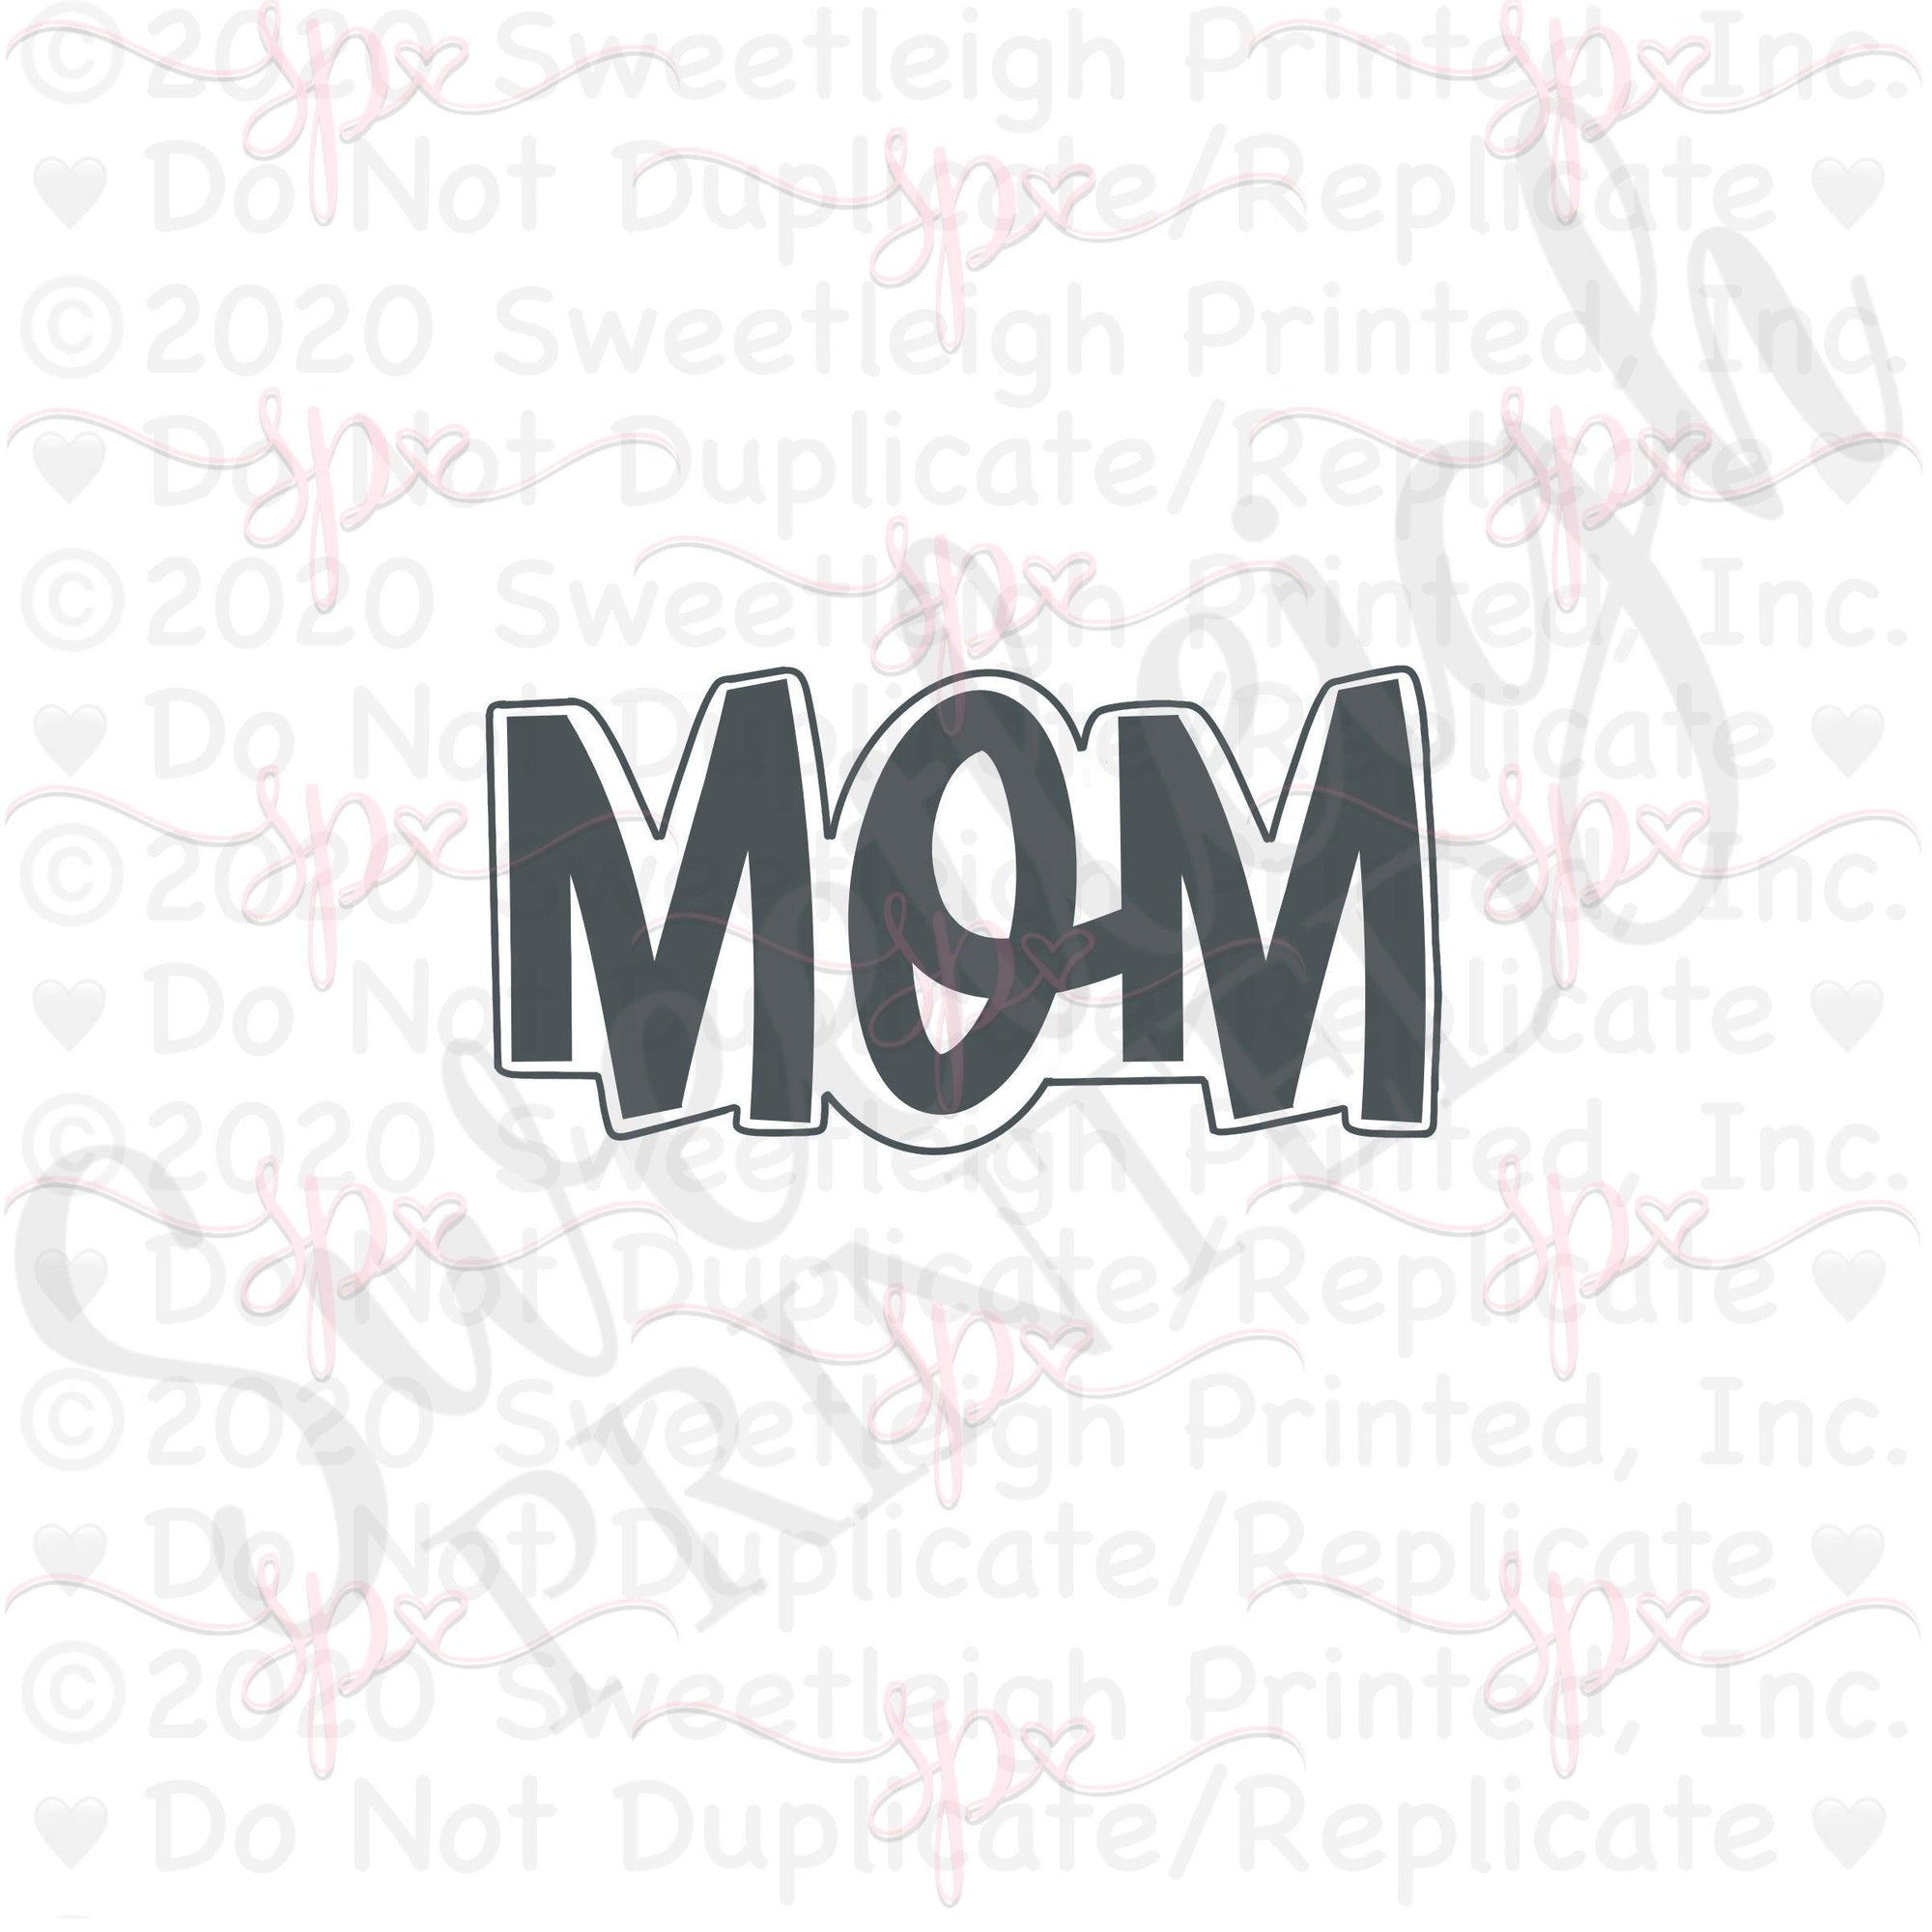 Mom Word 2021 Cookie Cutter - Sweetleigh 